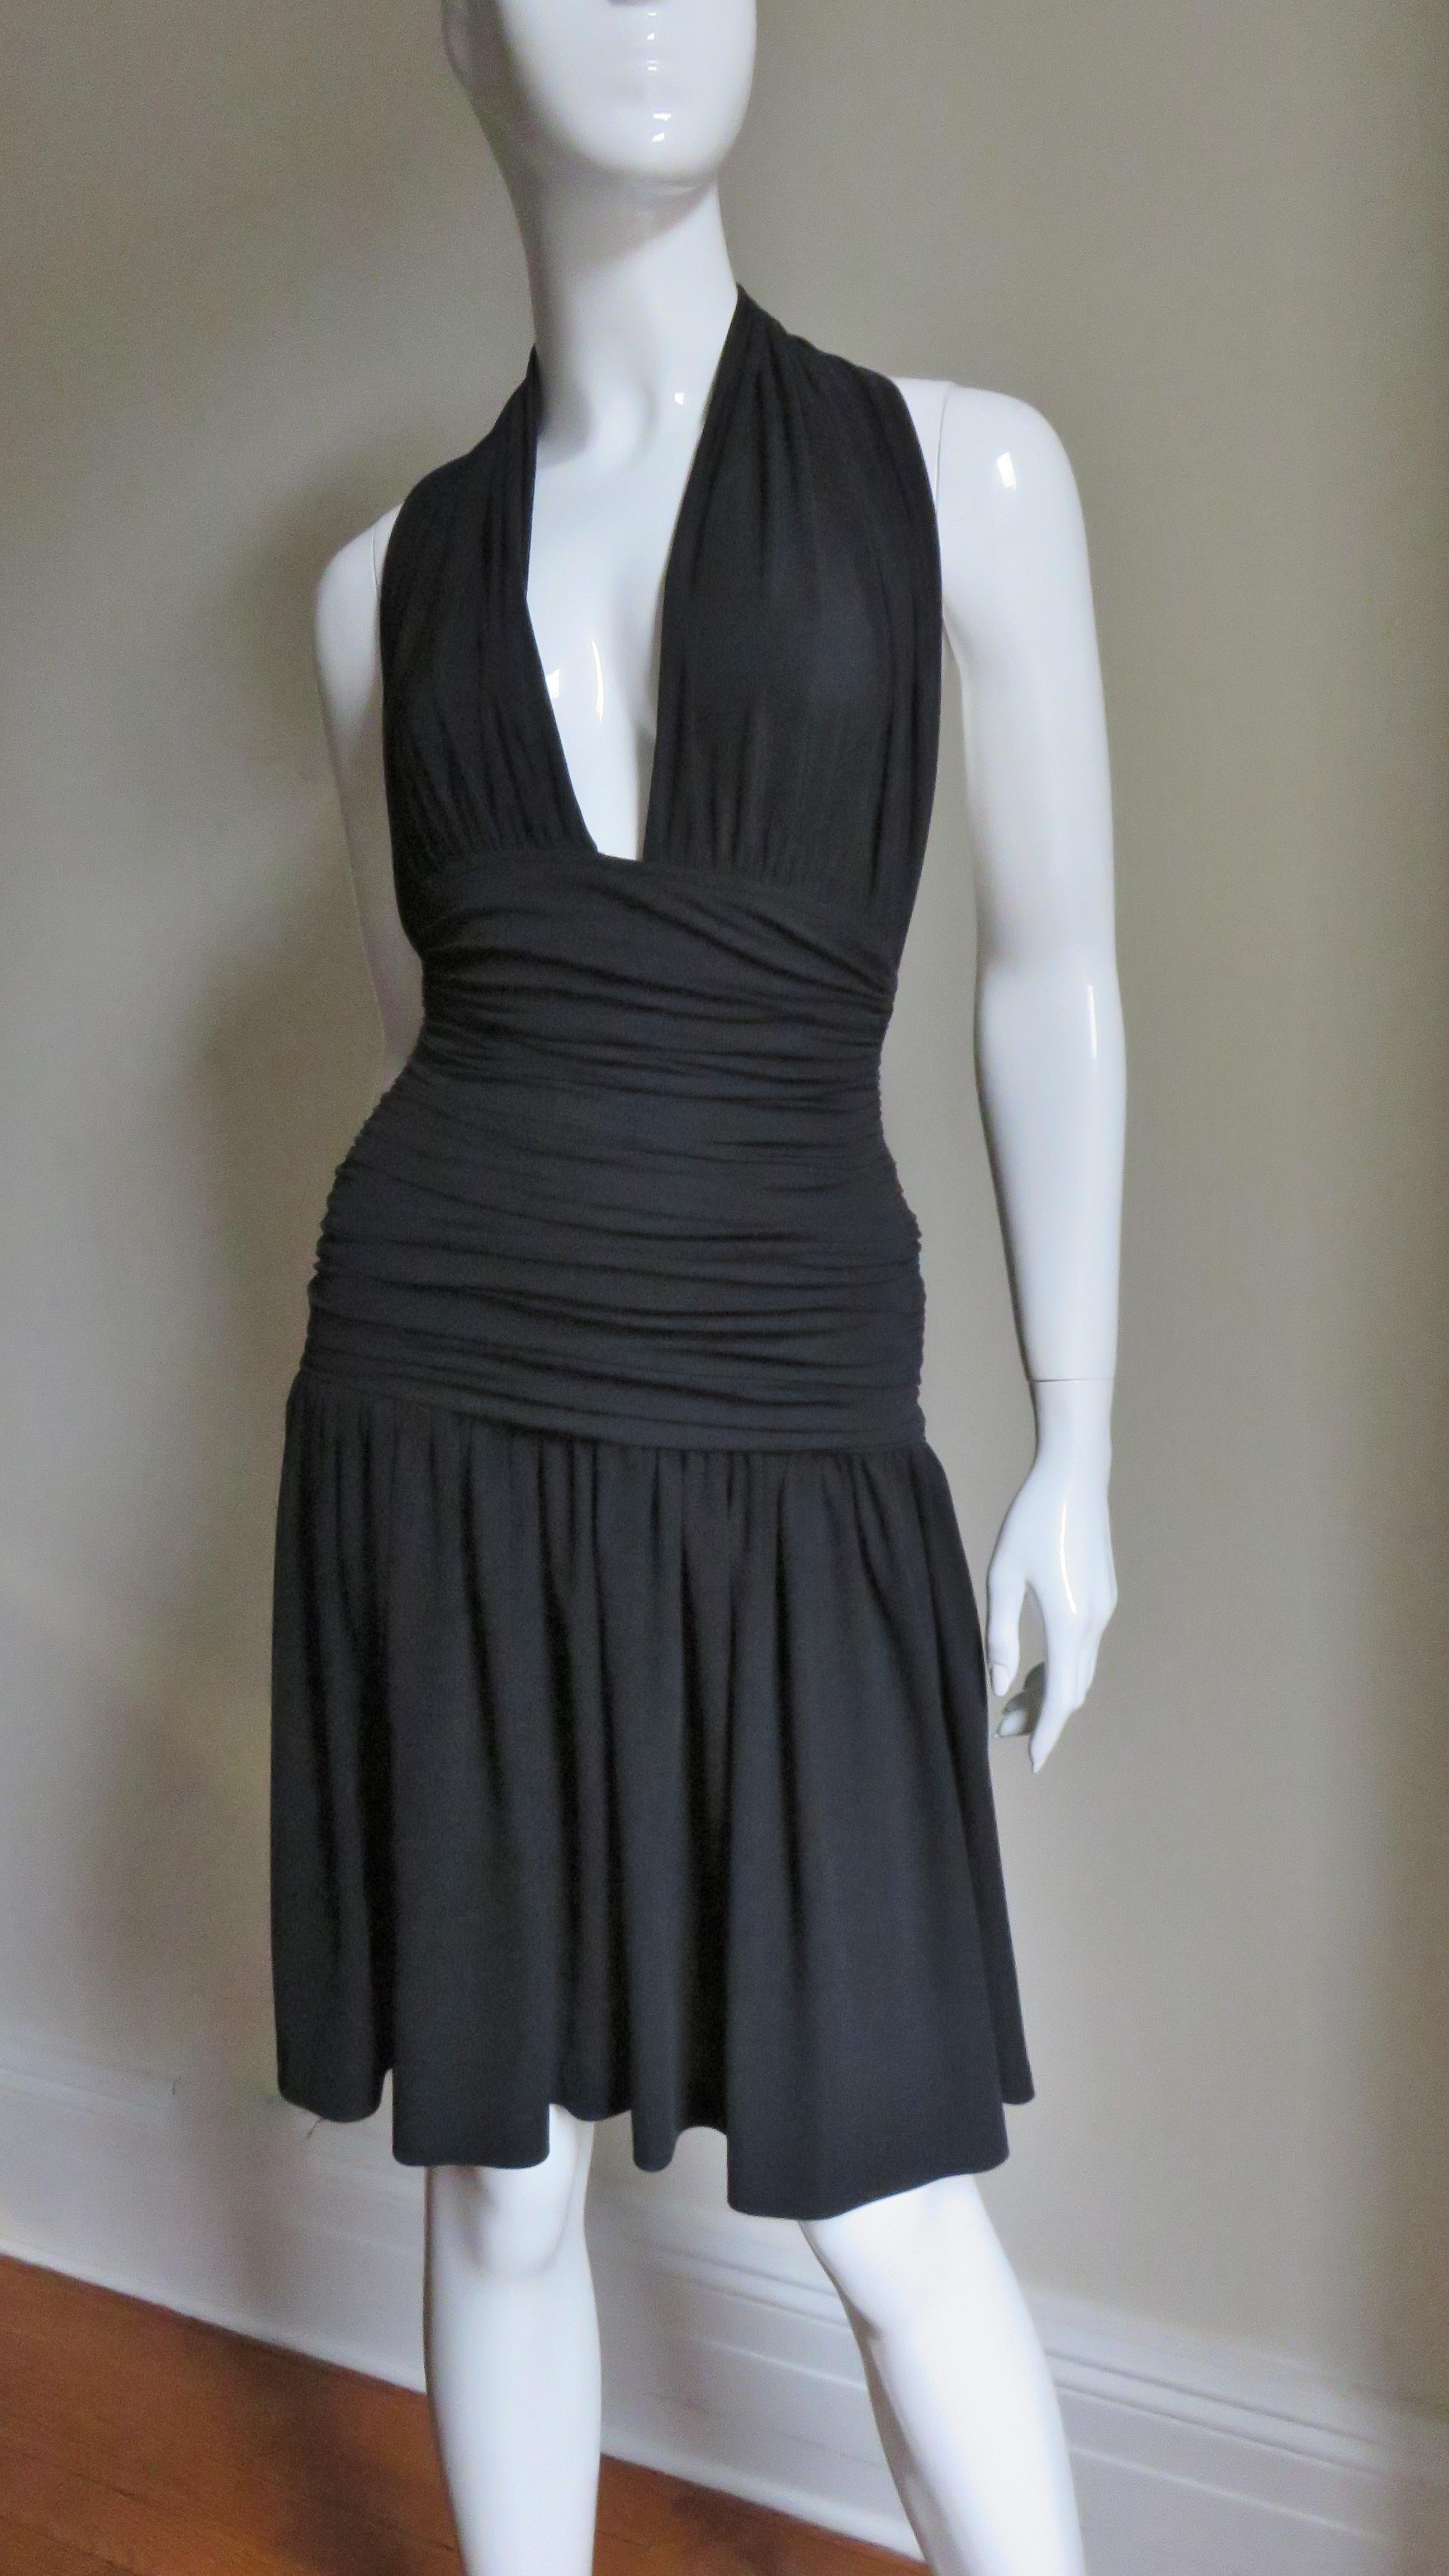 A great black jersey halter dress by Norma Kamali.  It has a ruched plunging halter neck and a horizontally ruched band from under the bust through to the upper hips.  The skirt is gathered and full and the dress slips on over the head. 
Fits sizes